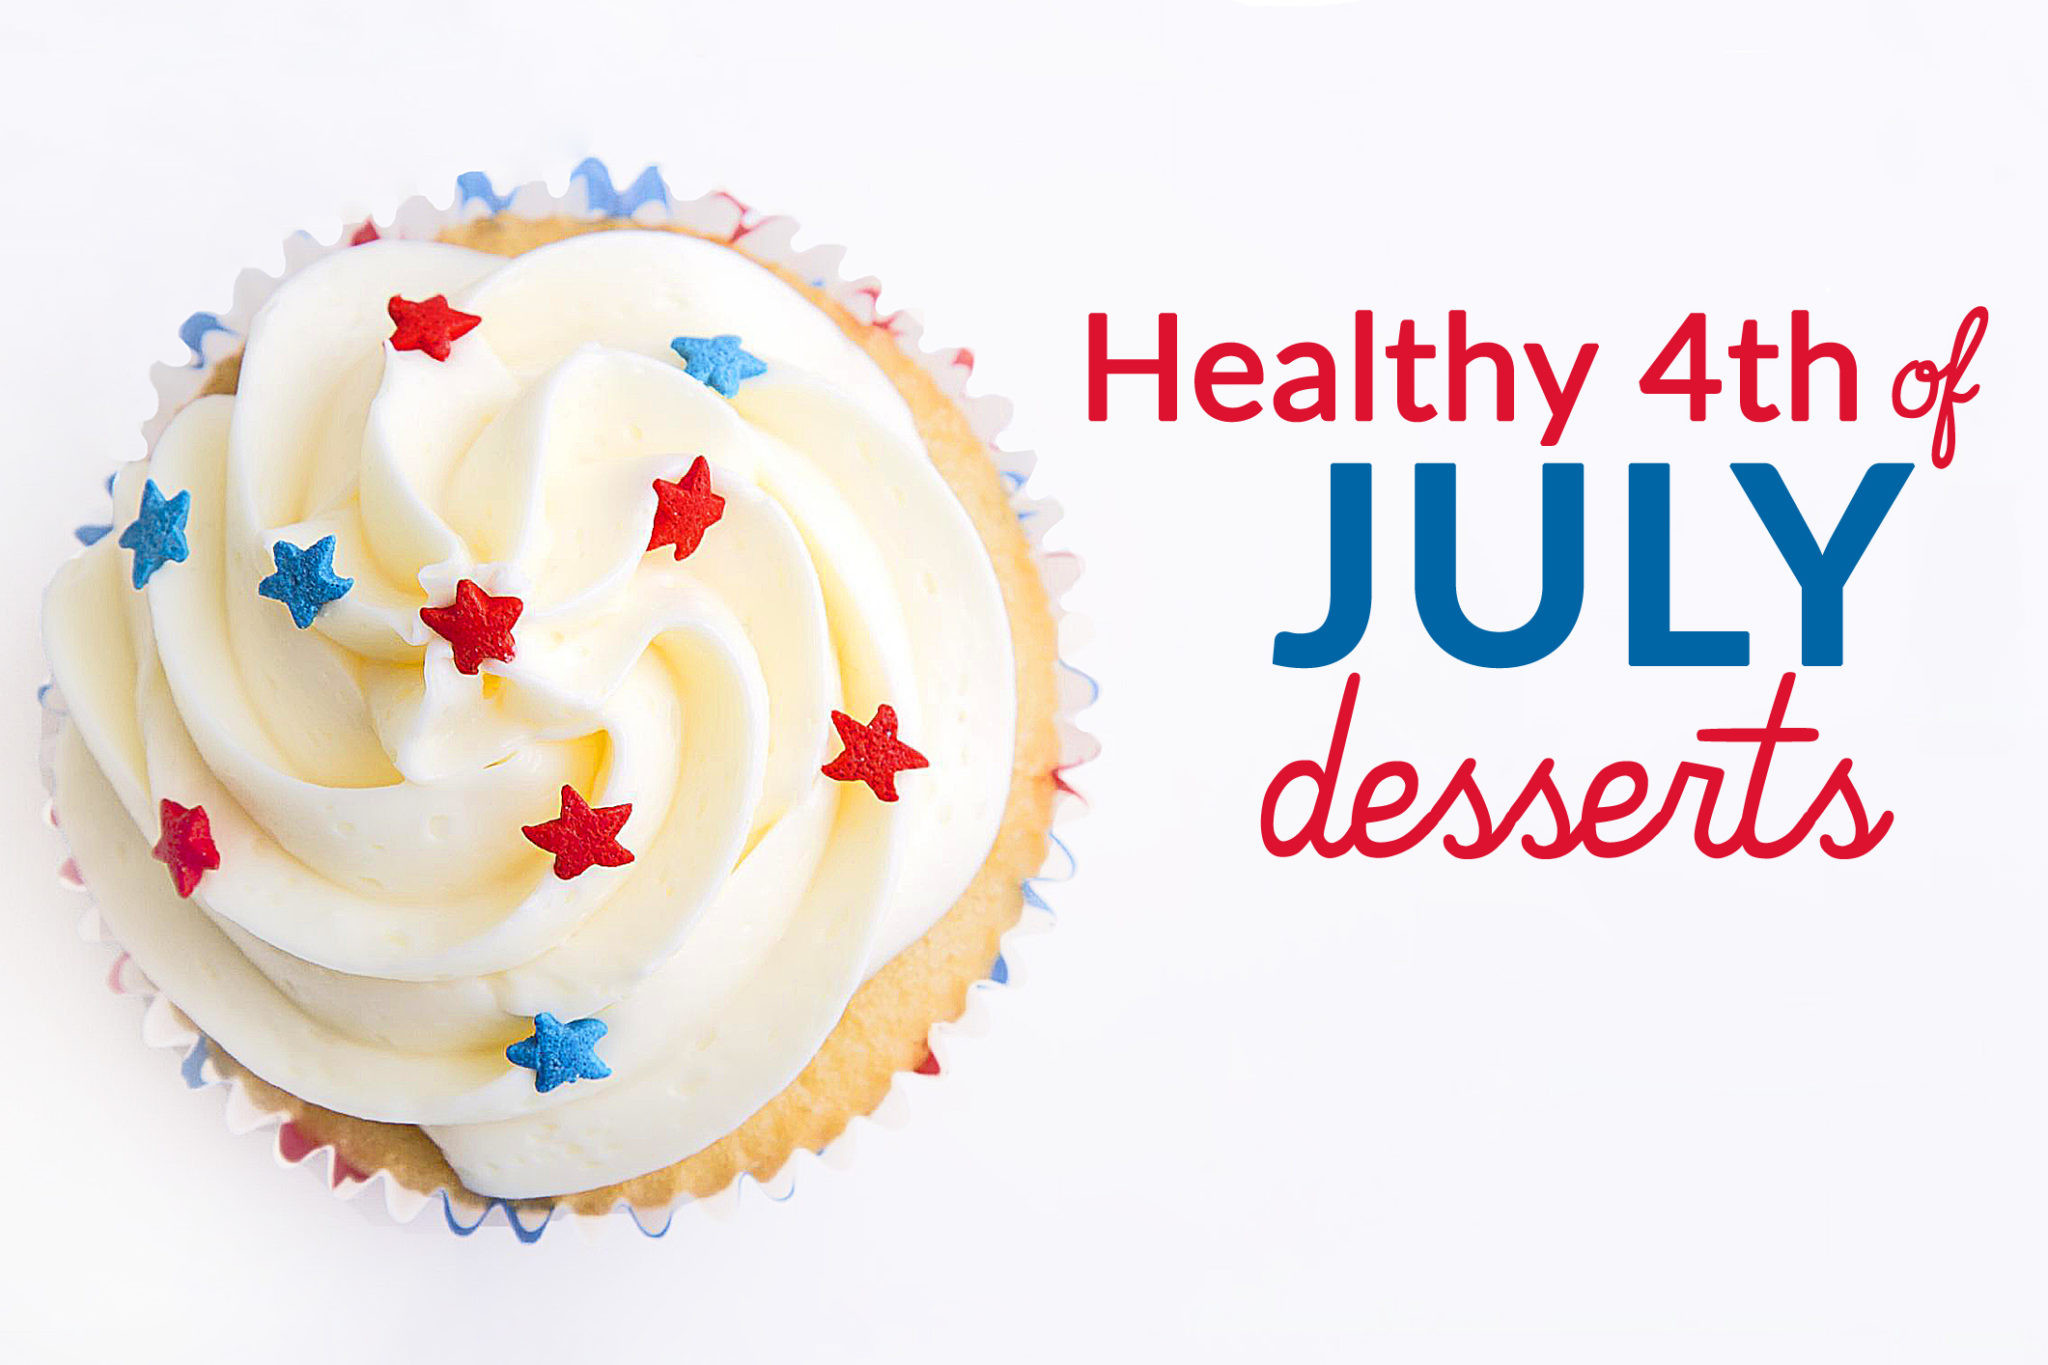 Healthy 4Th Of July Desserts
 Recipe Roundup Healthy 4th of July Desserts Healthy